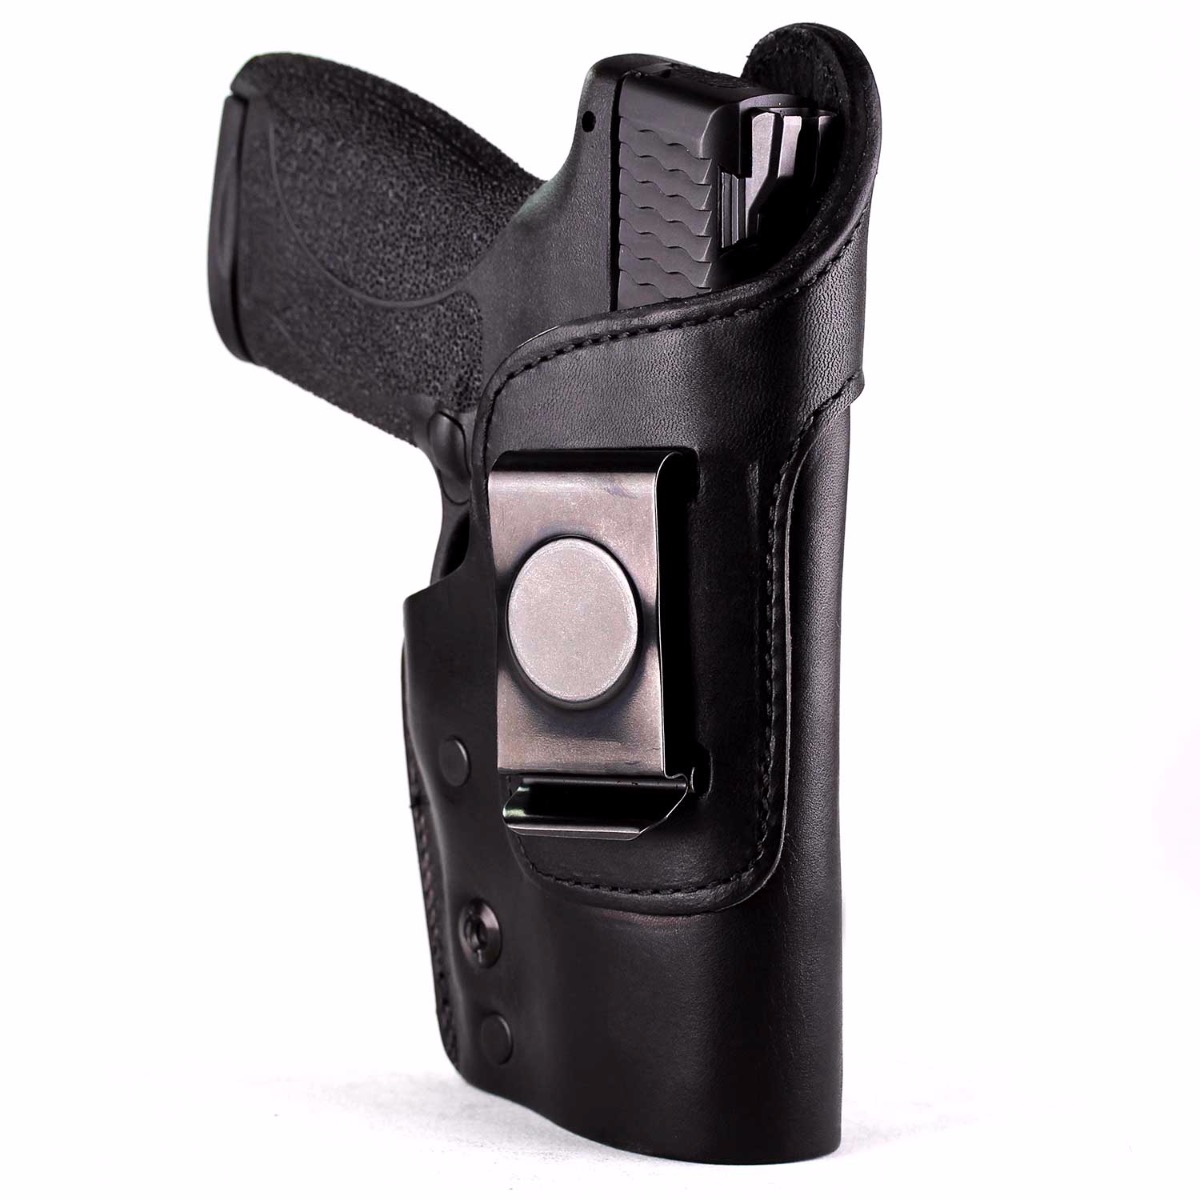 MULTI-CARRY HOLSTER FOR TAURUS MILLENNIUM G2 IWB & OWB LEATHER HOLSTER. 